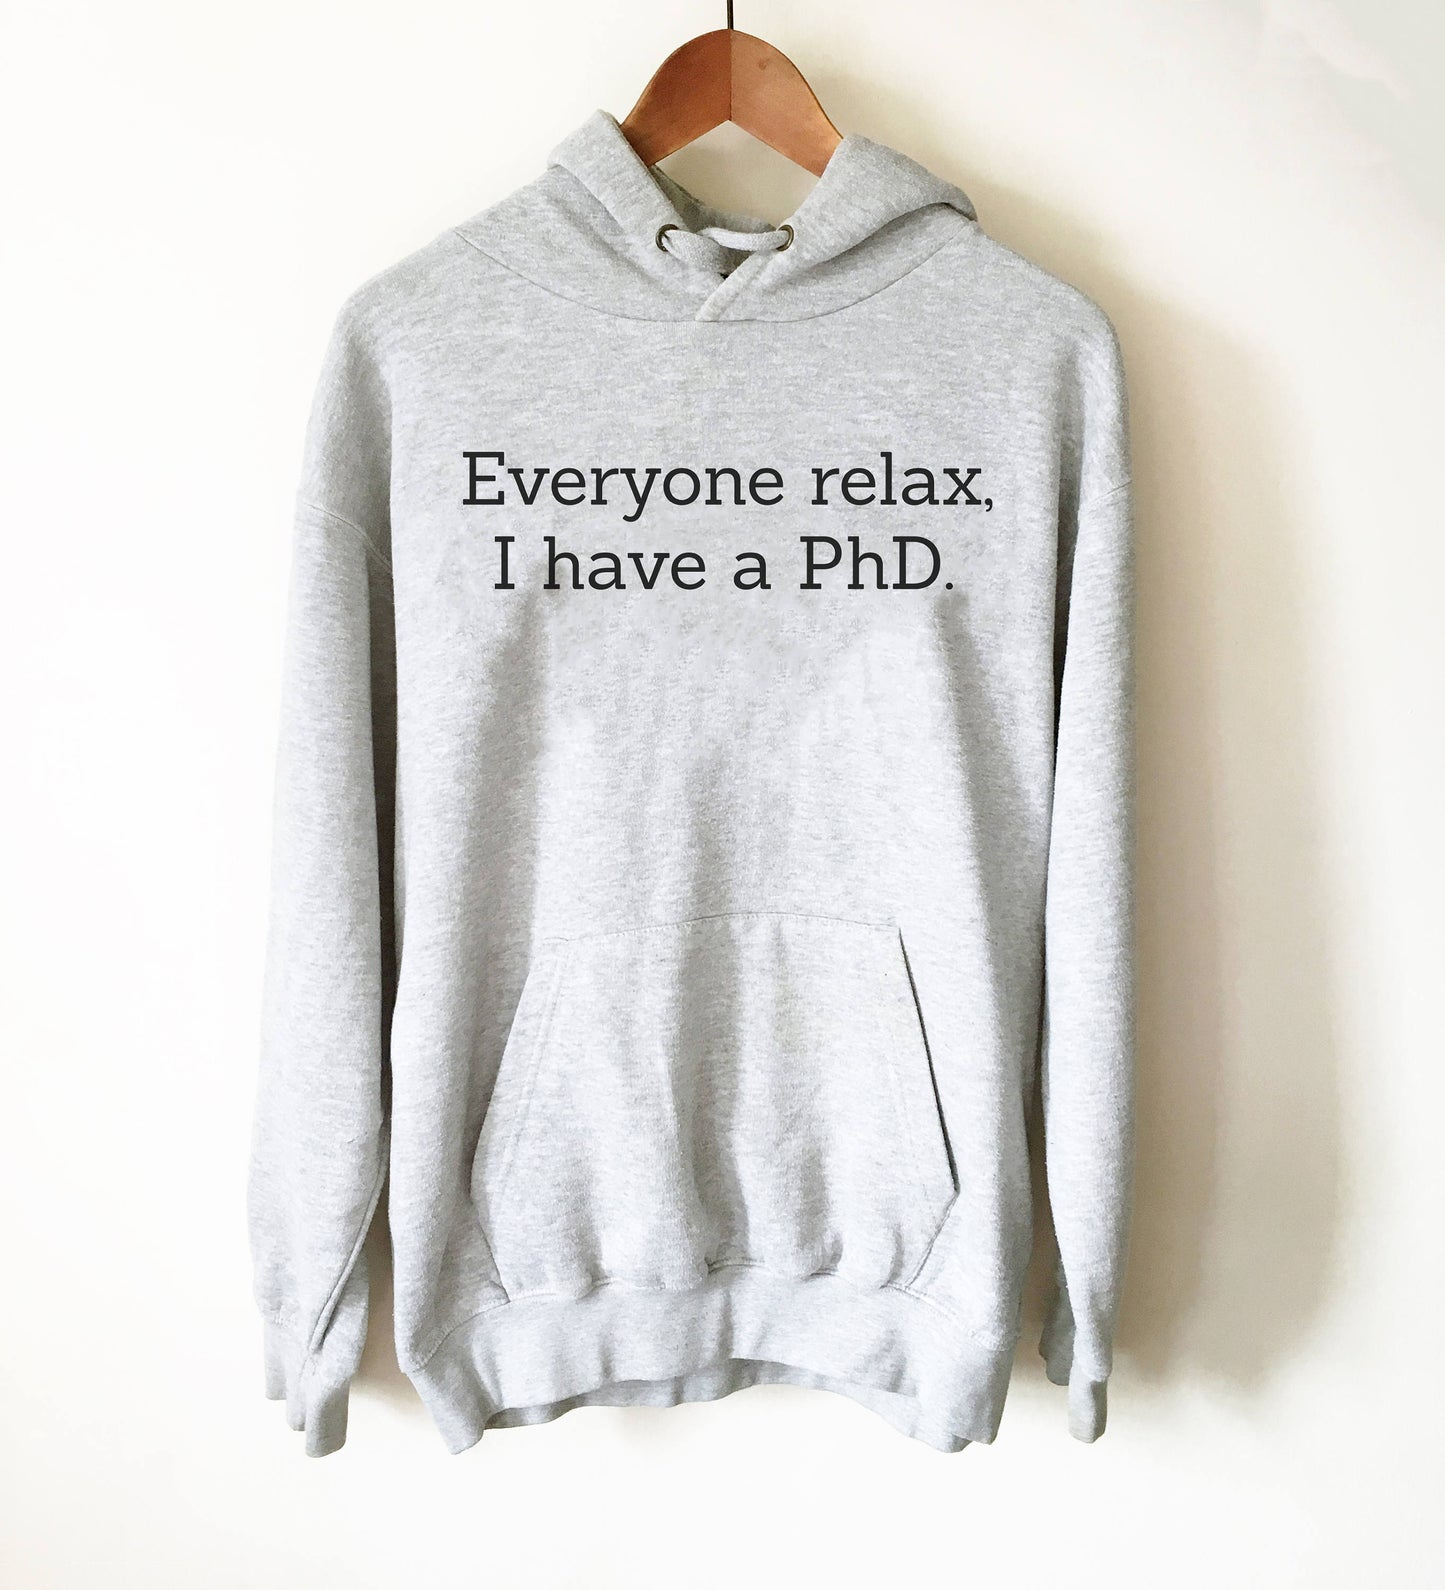 Everyone Relax I Have A PhD Hoodie - phd graduation gift - Doctor Gift For Her - Funny Doctor T-Shirt - Unique Doctor Shirt